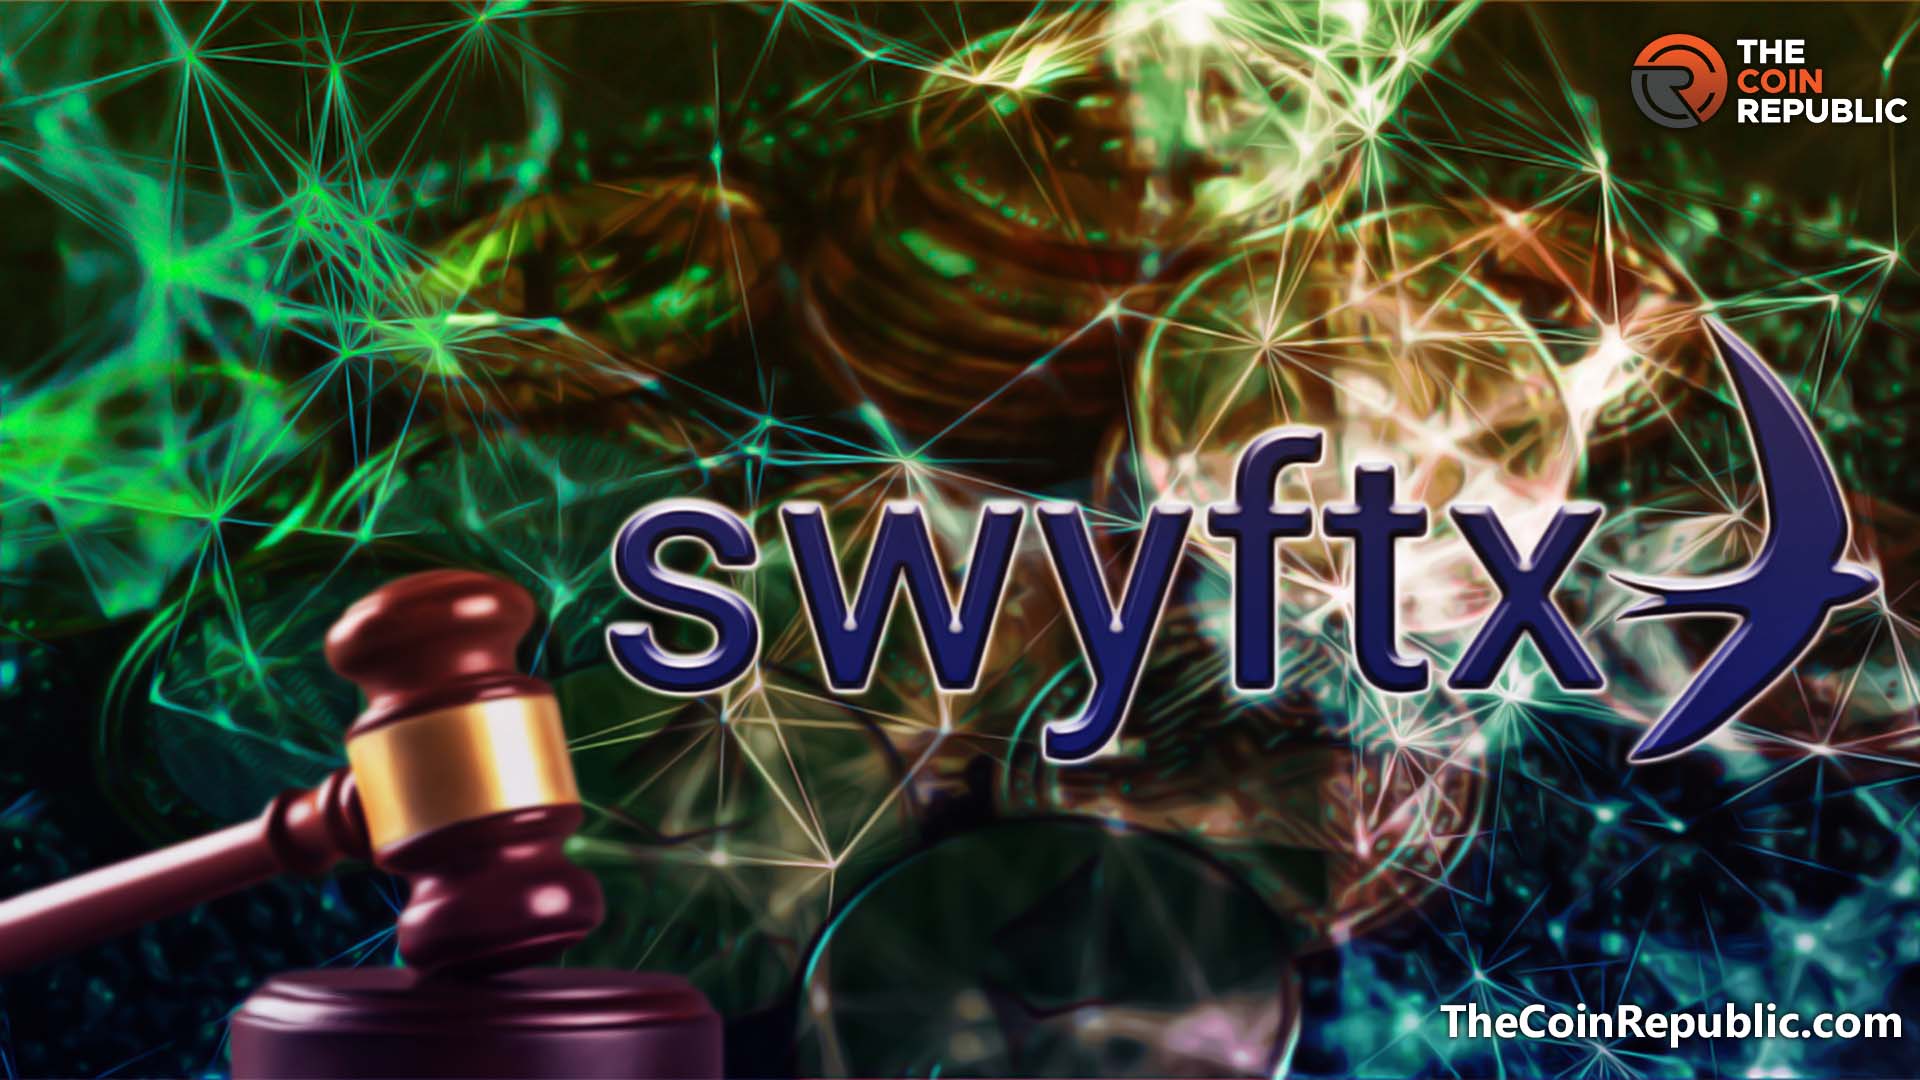 Swyftx Closes Earn Program Citing Lack of Regulatory Clarity; Are customer funds safe?